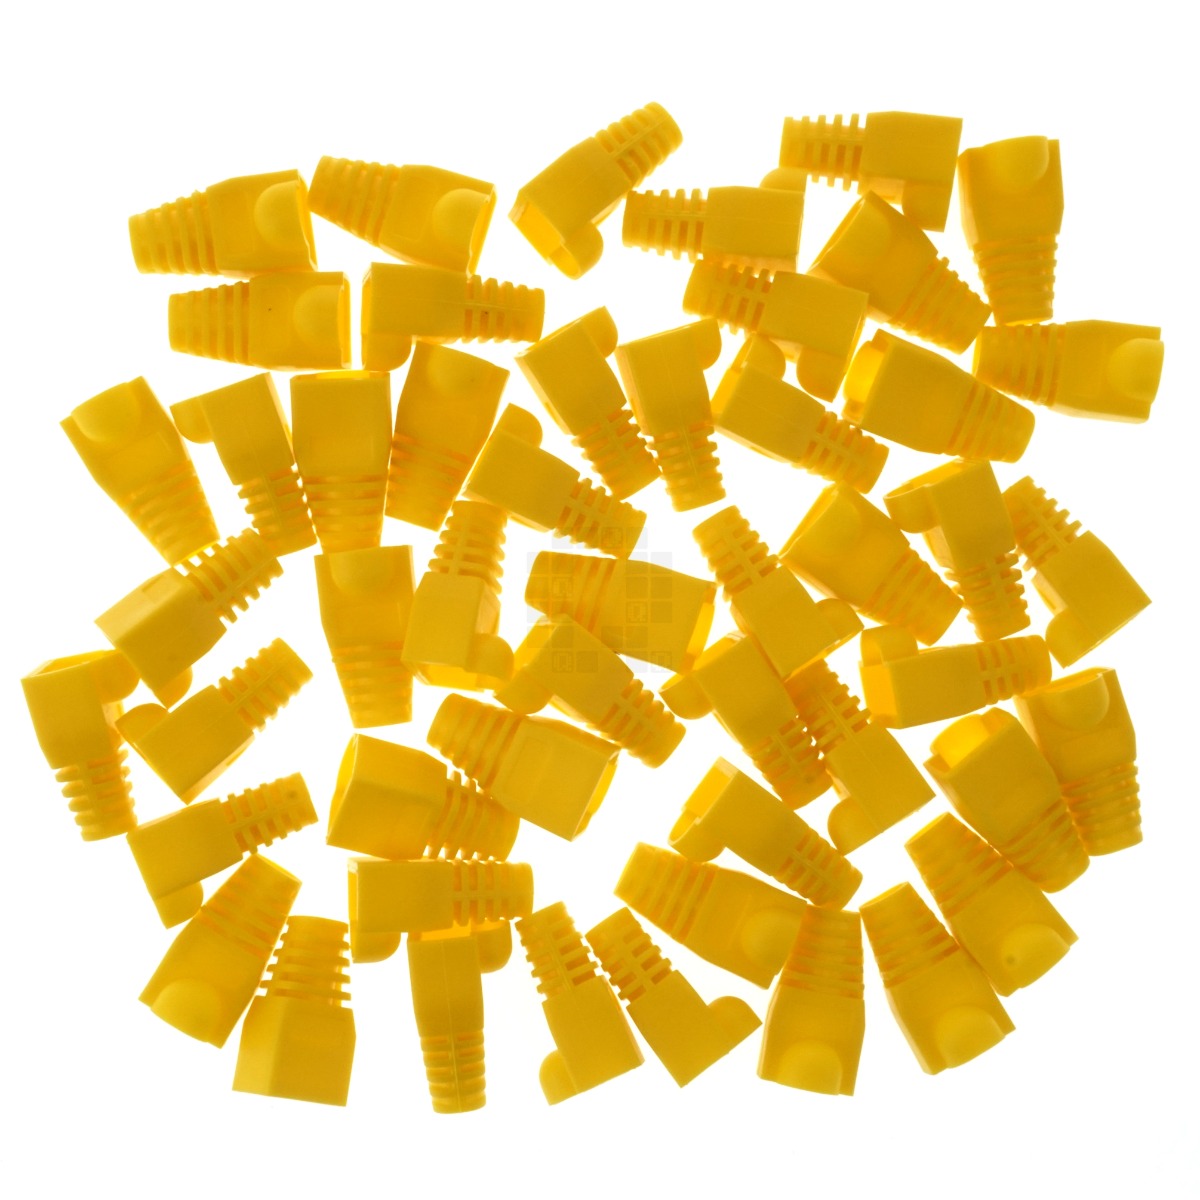 RJ-45 RJ45 Ethernet Strain Relief Boot Cover, Yellow, for CAT5 CAT6, 50 Pack